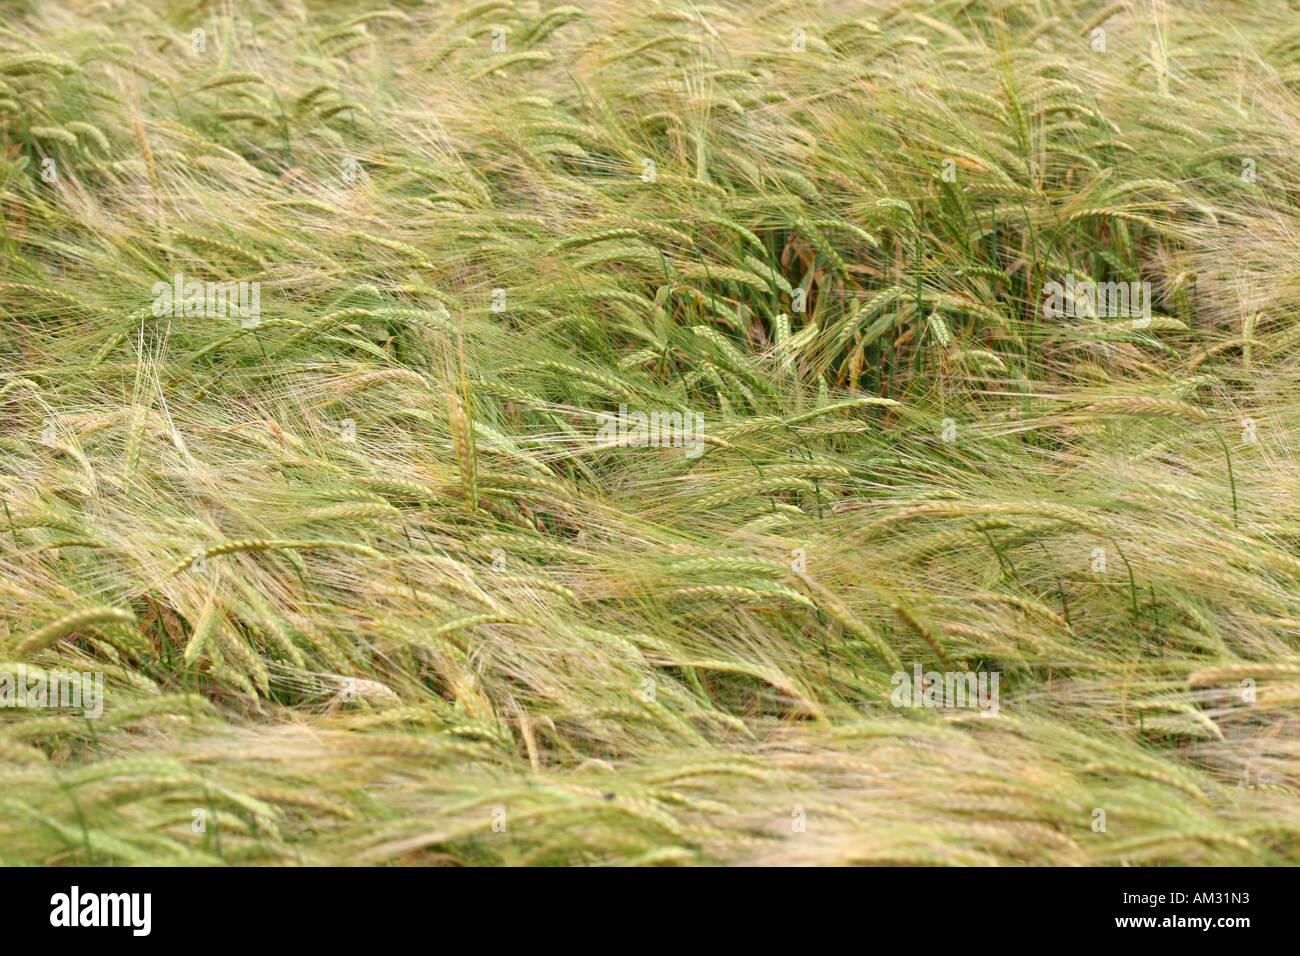 a field of wheat Stock Photo